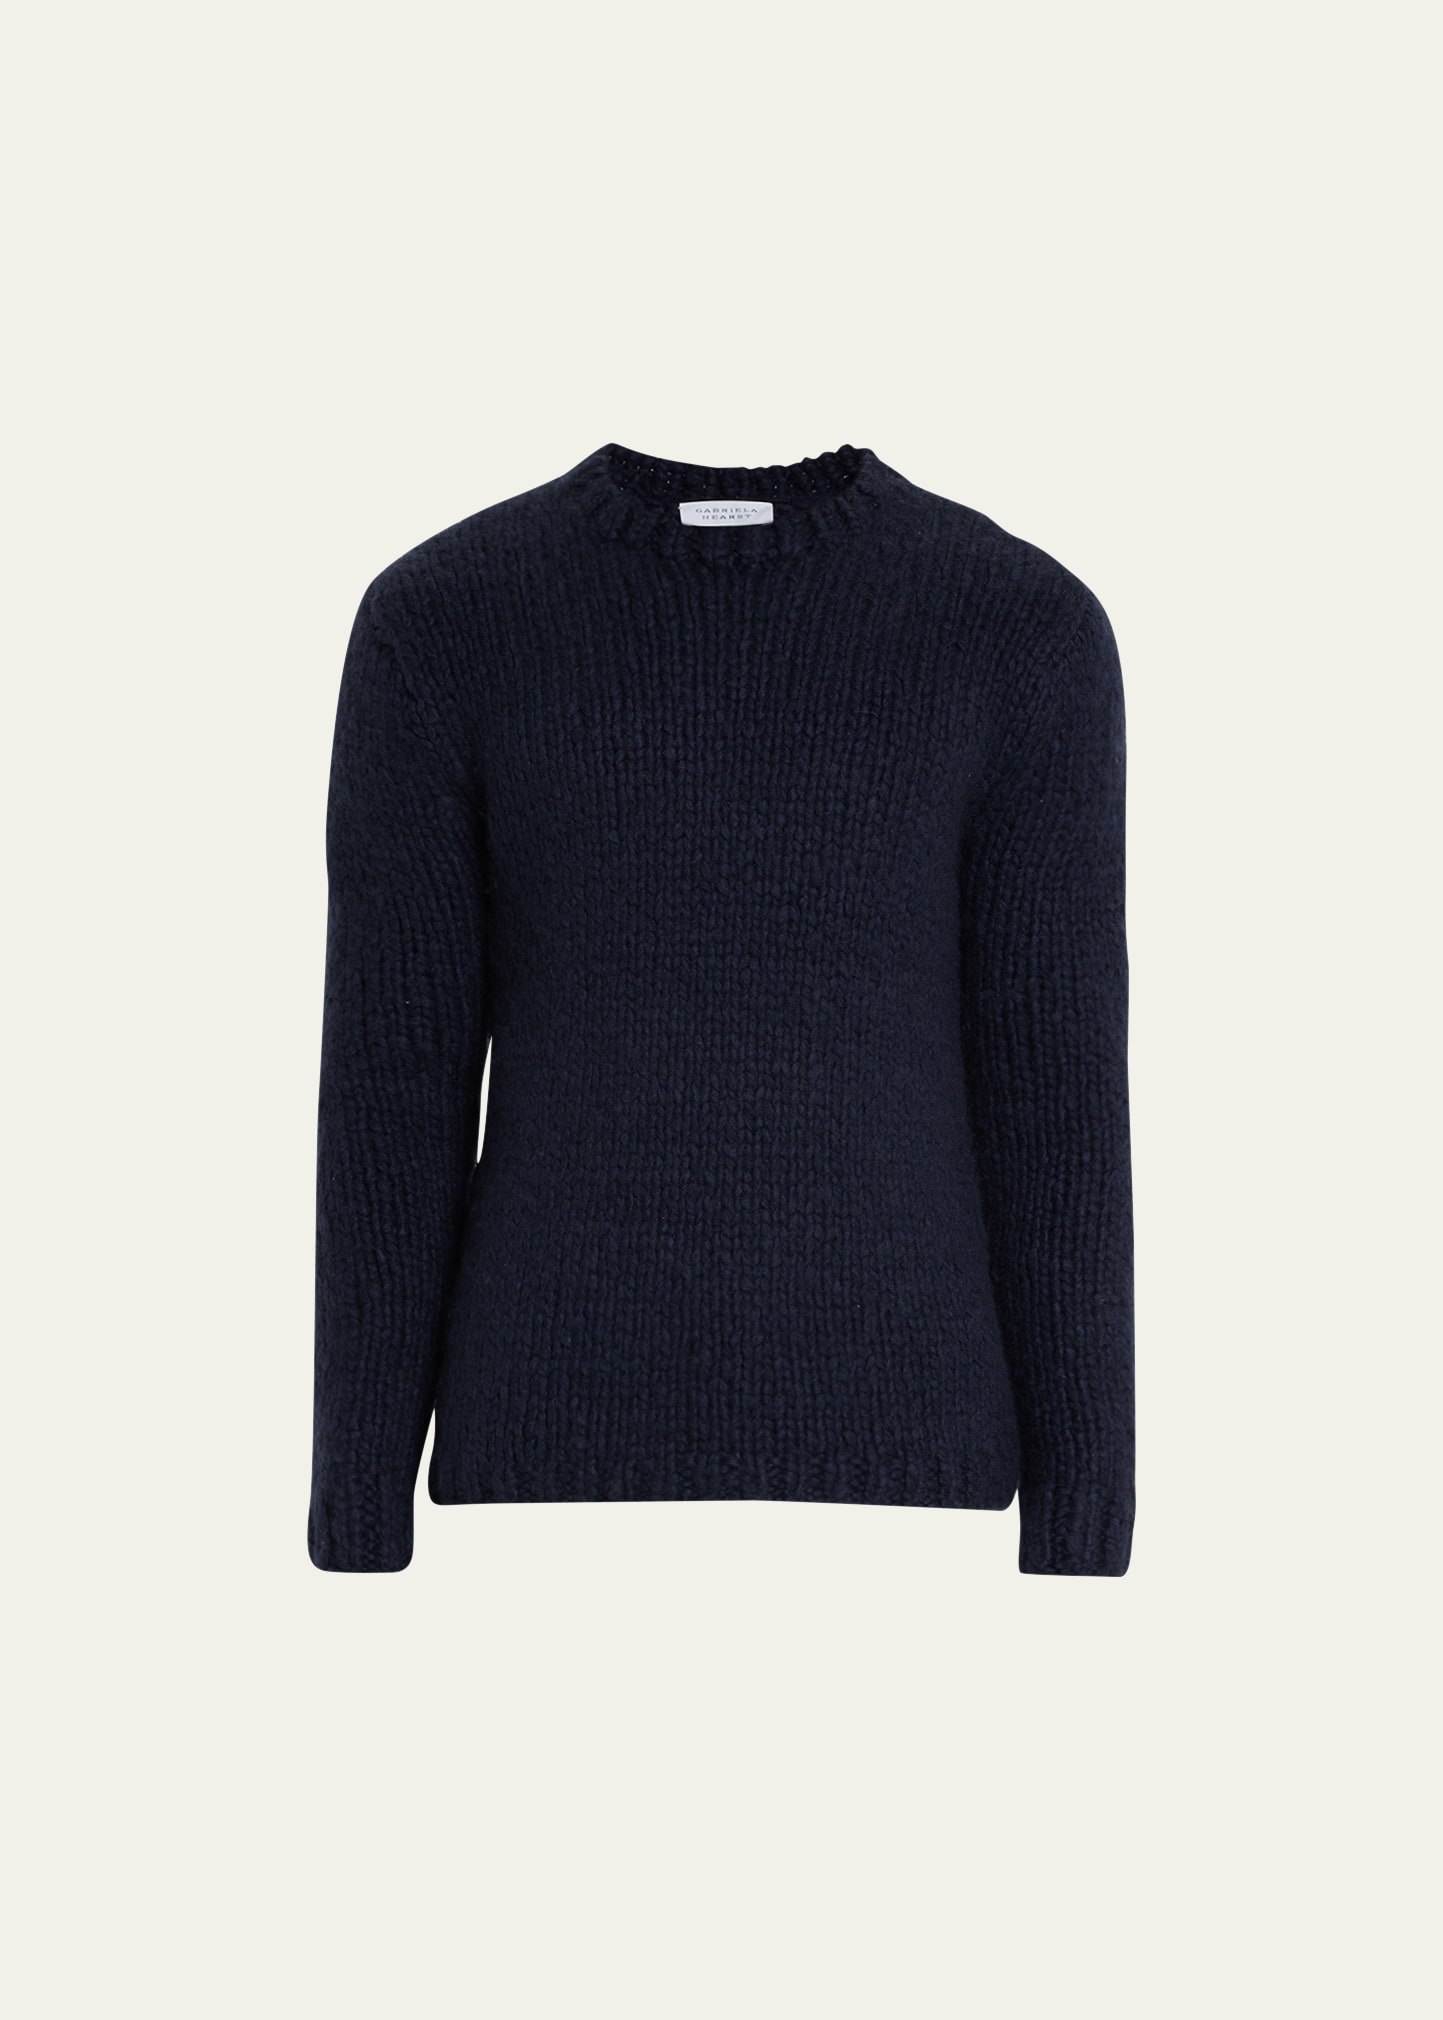 Gabriela Hearst Men's Lawrence Cashmere Sweater In Navy